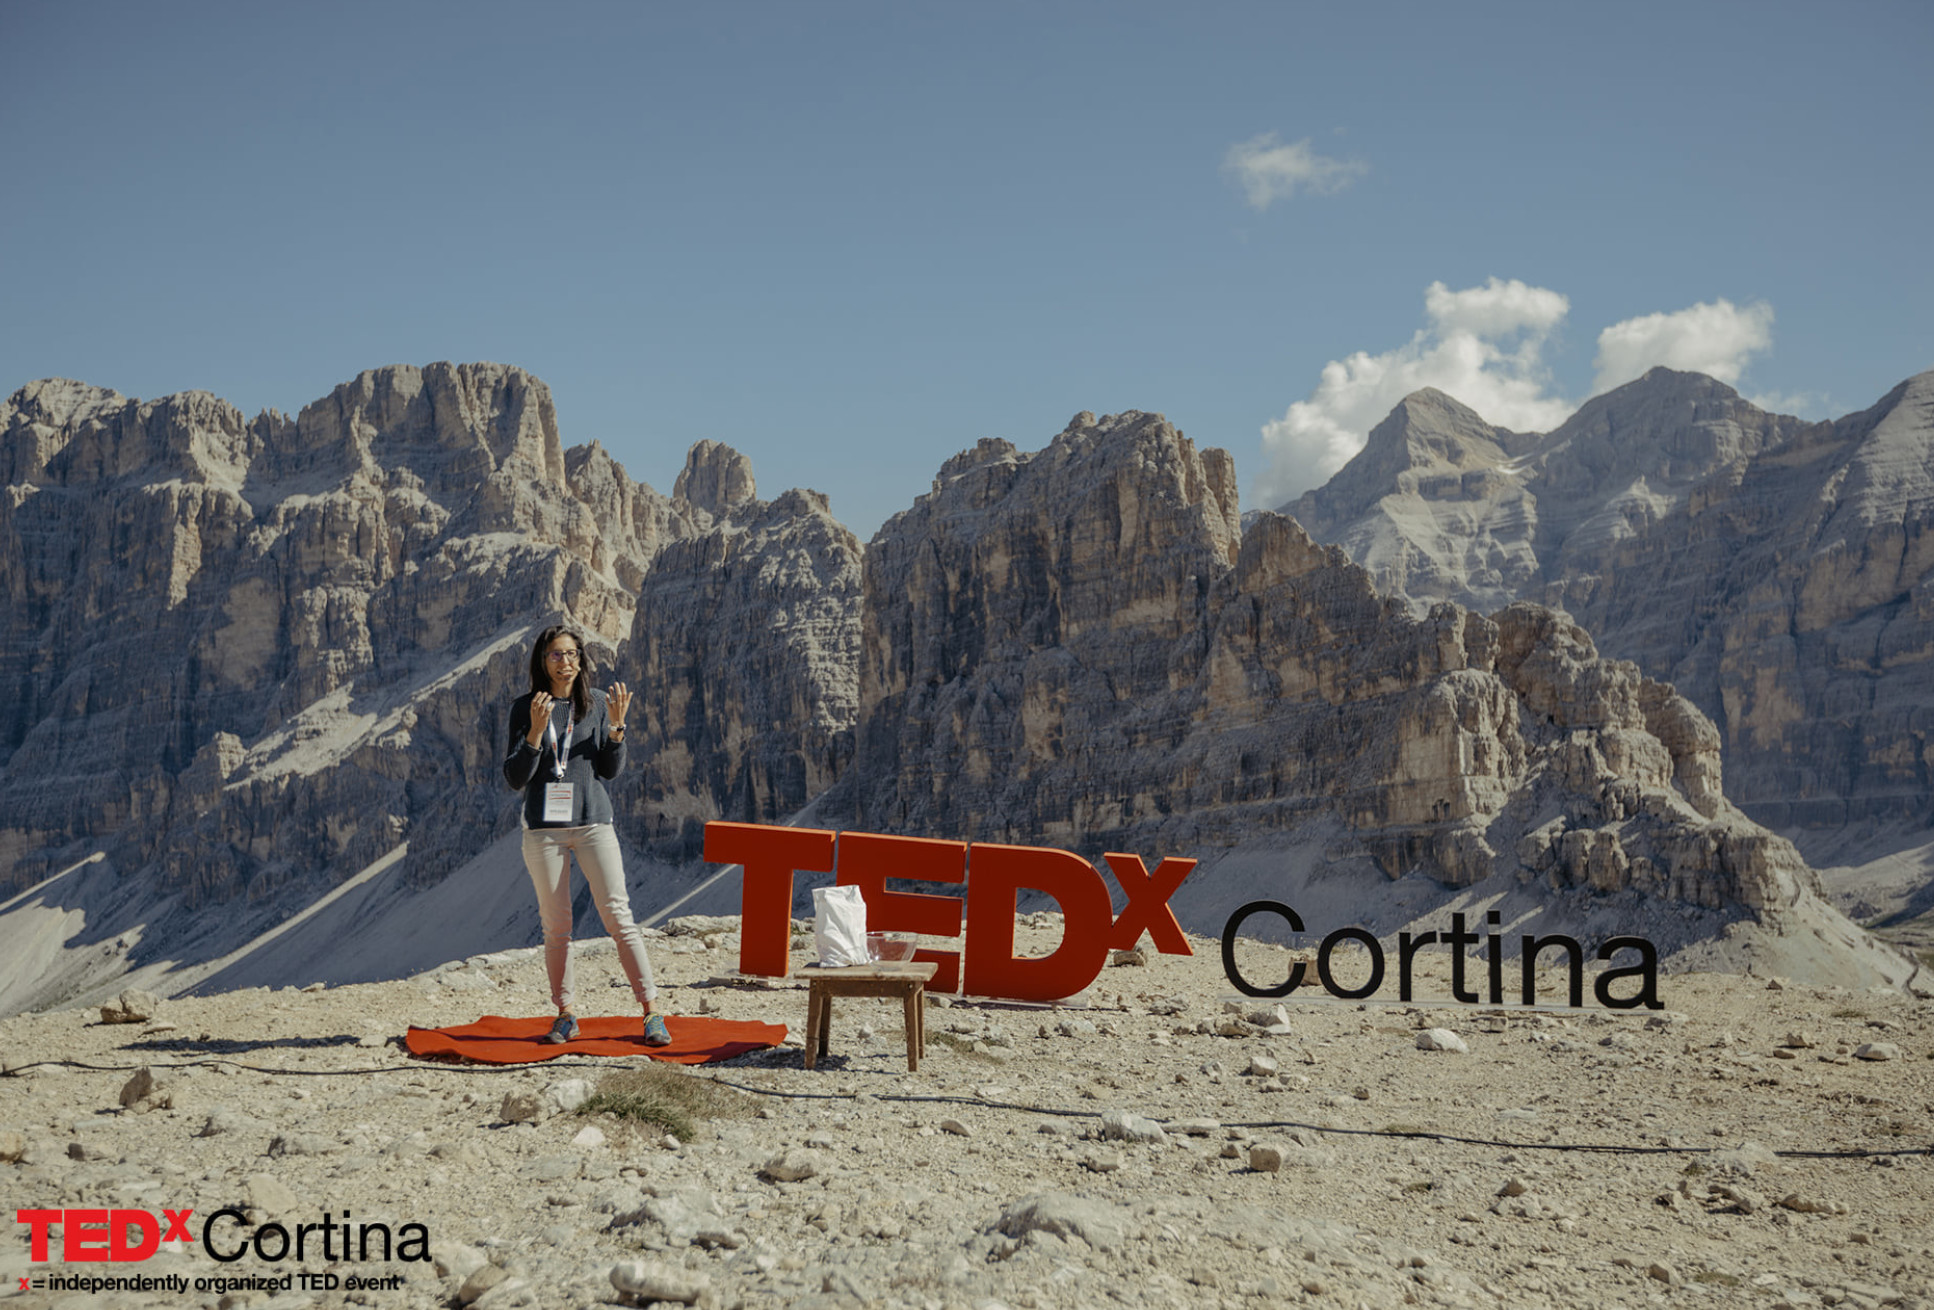 Dr Dorigatti gives a TedX talk about infectious disease during the Covid-19 pandemic, in the Italian Dolomites.